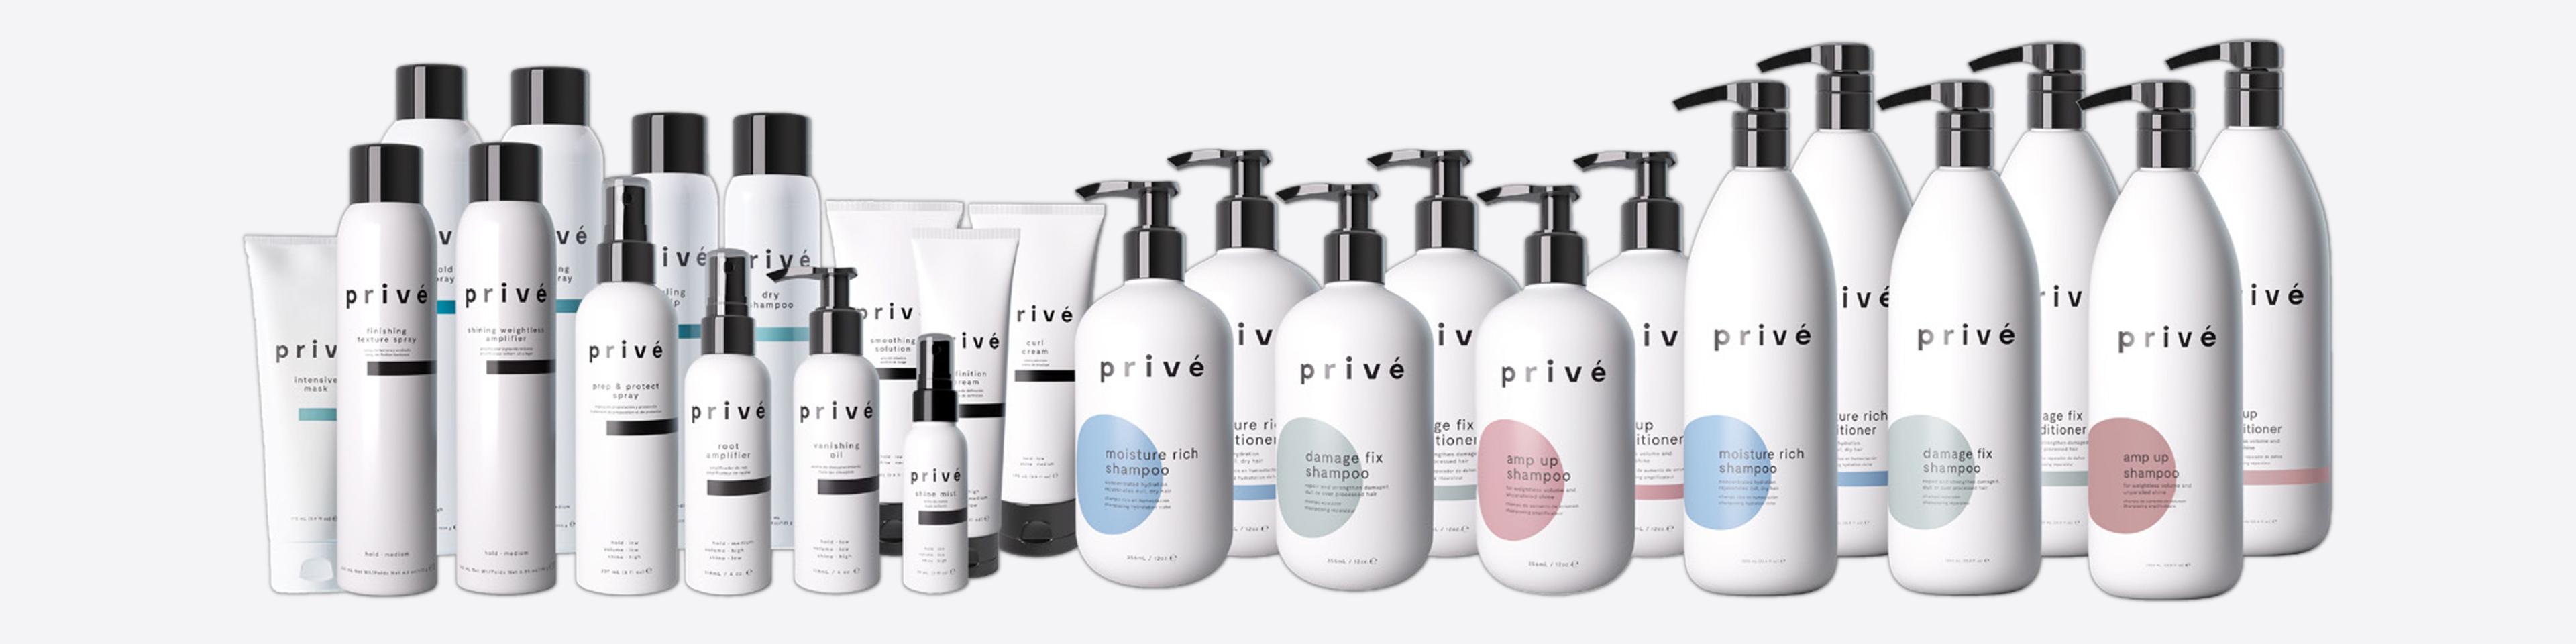 How This Women-Led, Clean Hair Care Brand is Shaking Up the Beauty Industry